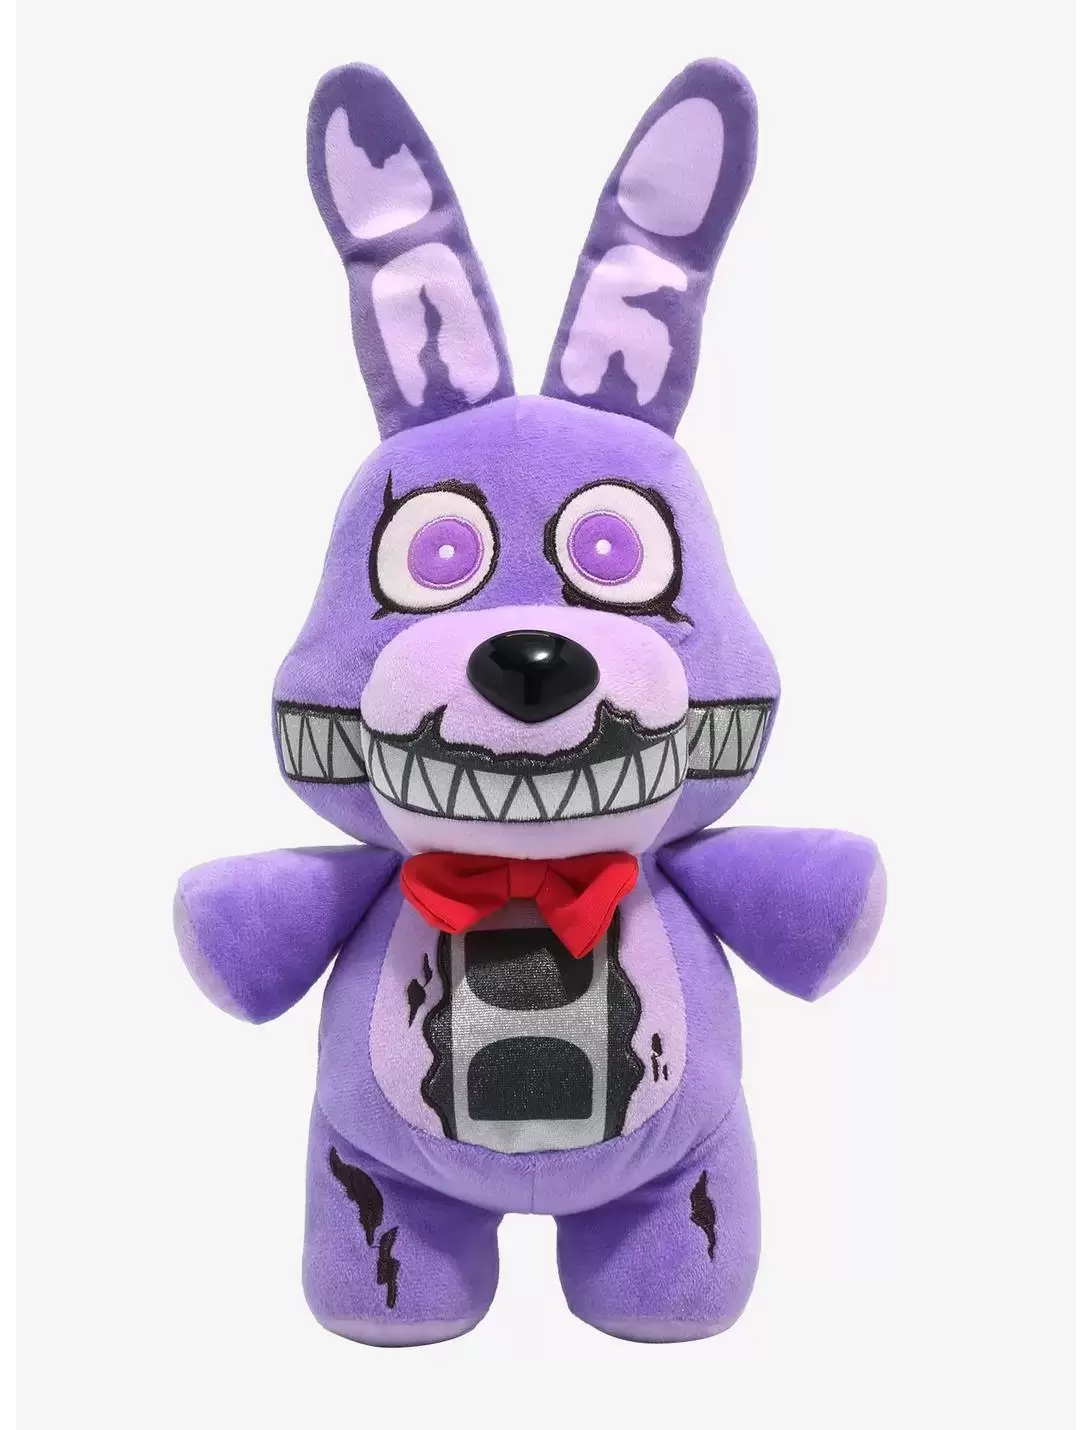 Funko Plush: Five Nights at Freddy's: Security Breach Moon 16-in